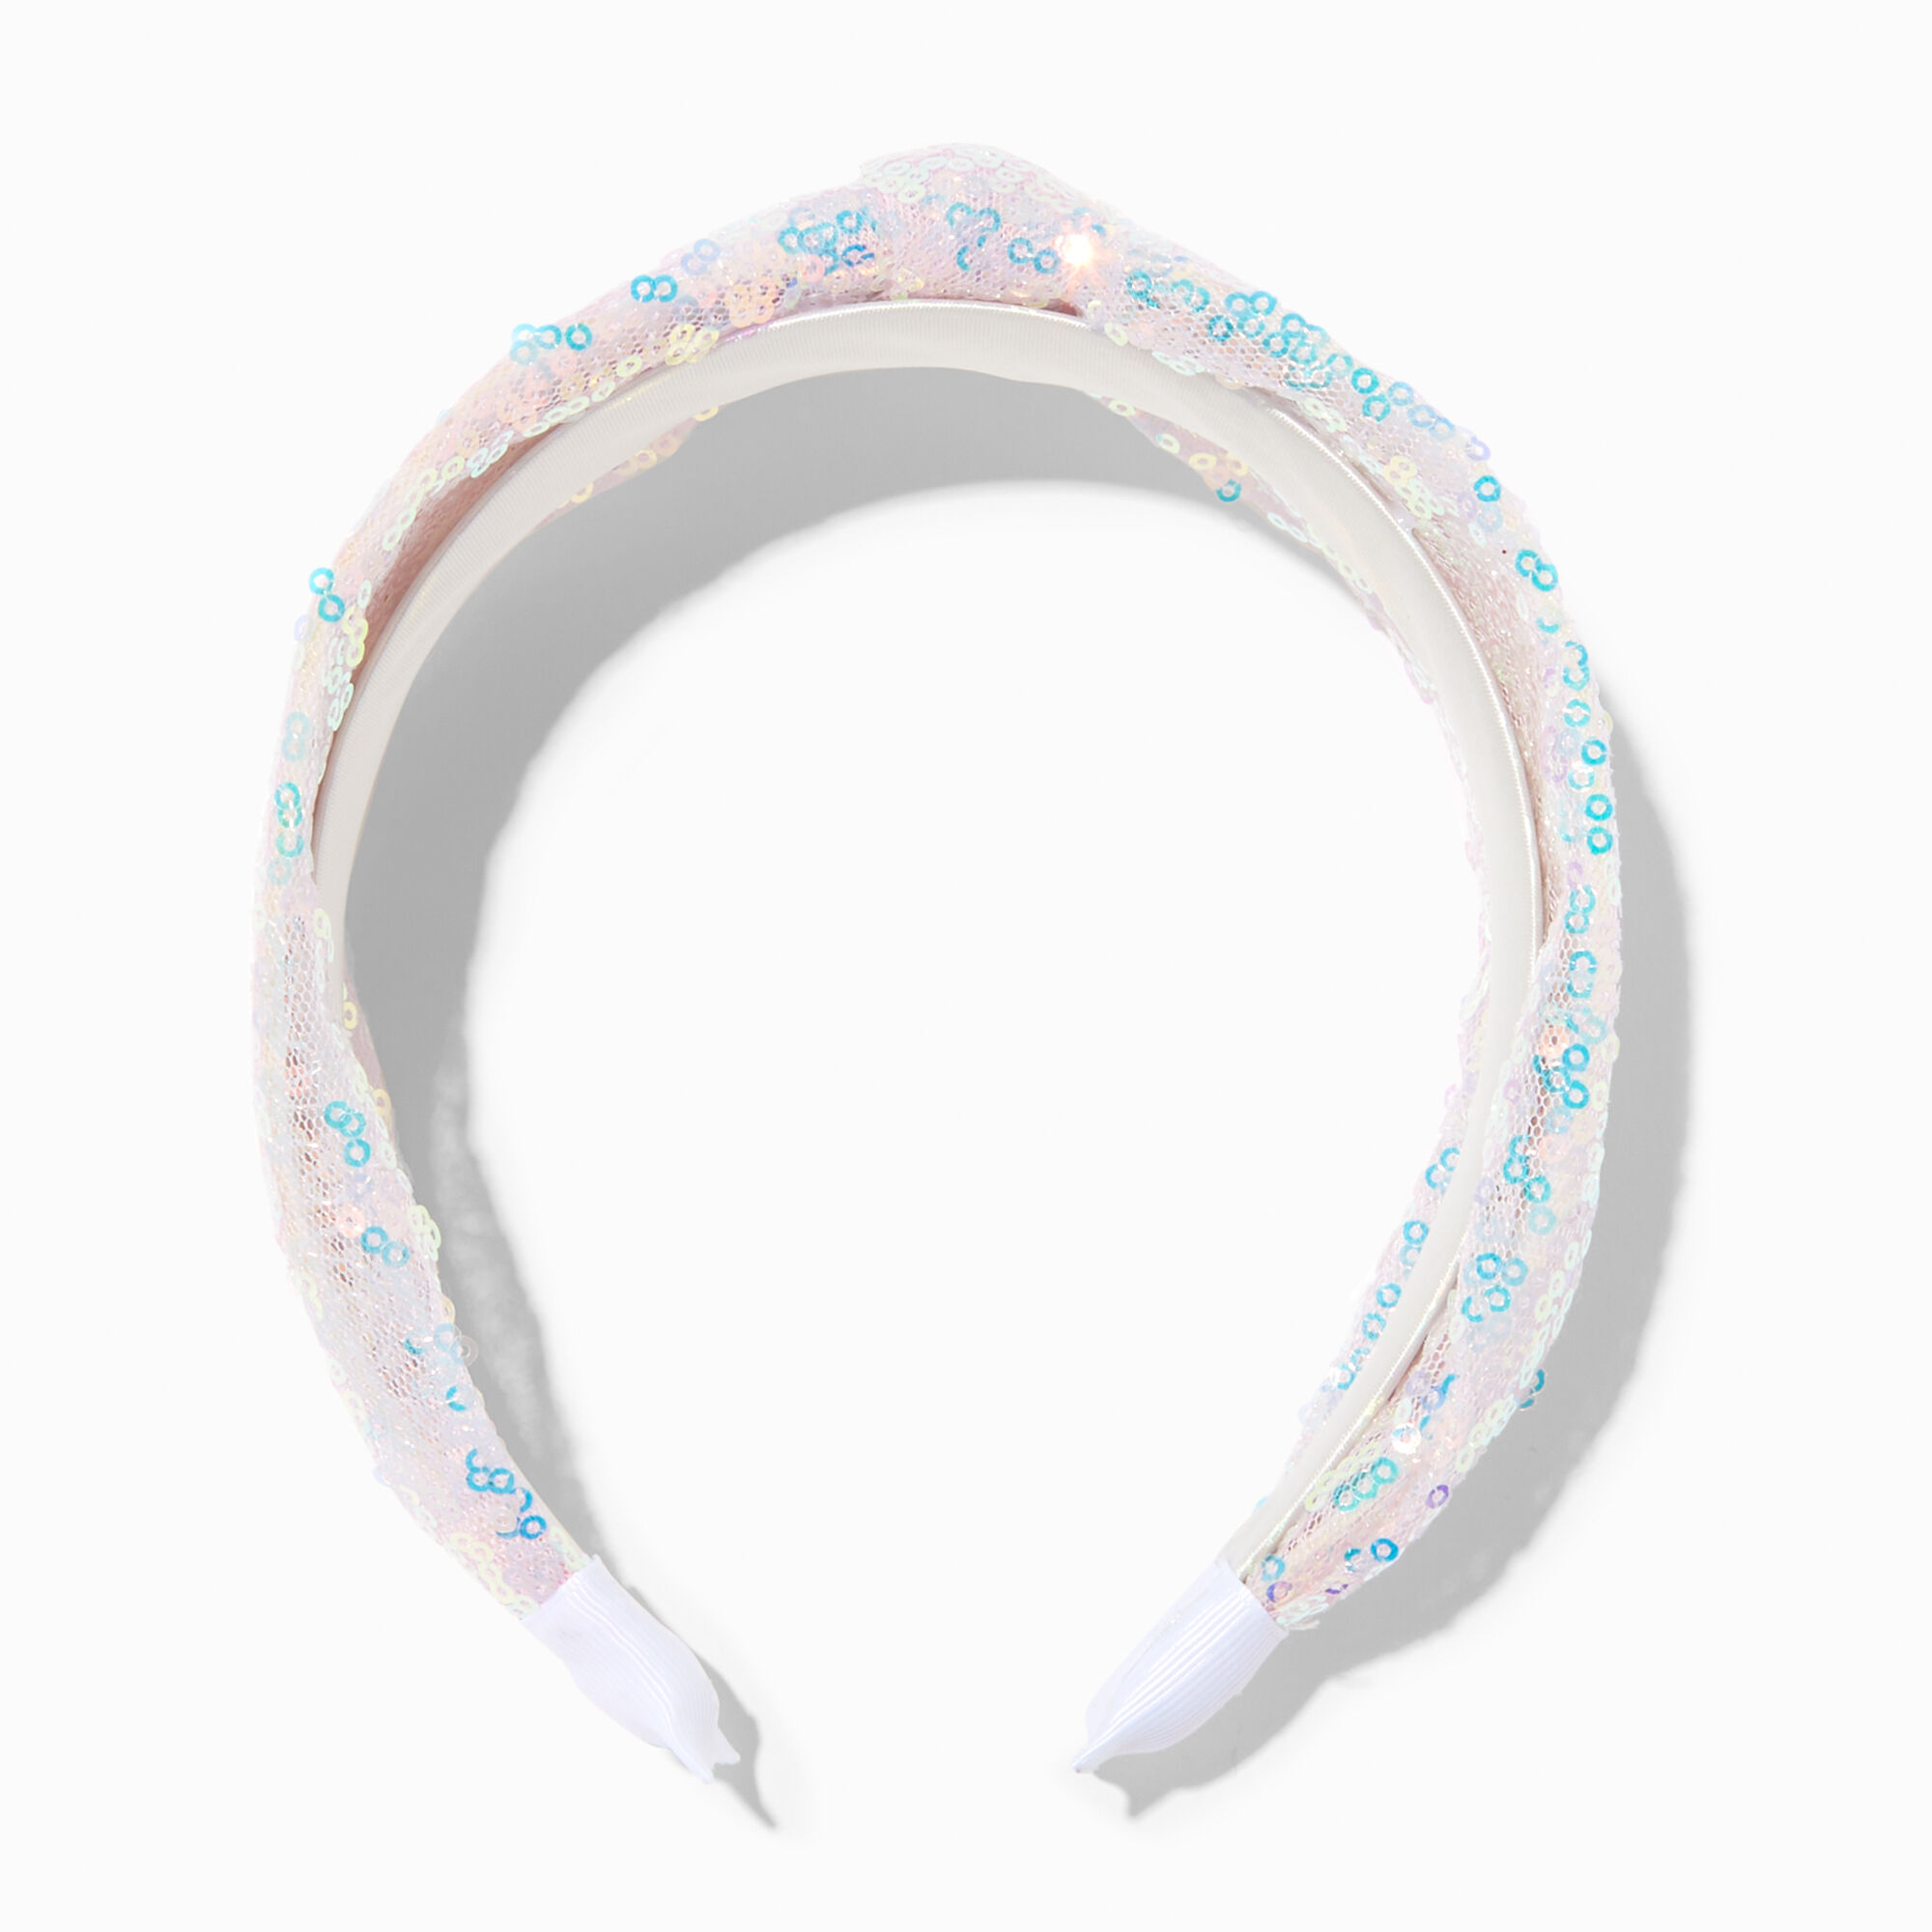 View Claires Iridescent Sequence Knotted Headband information